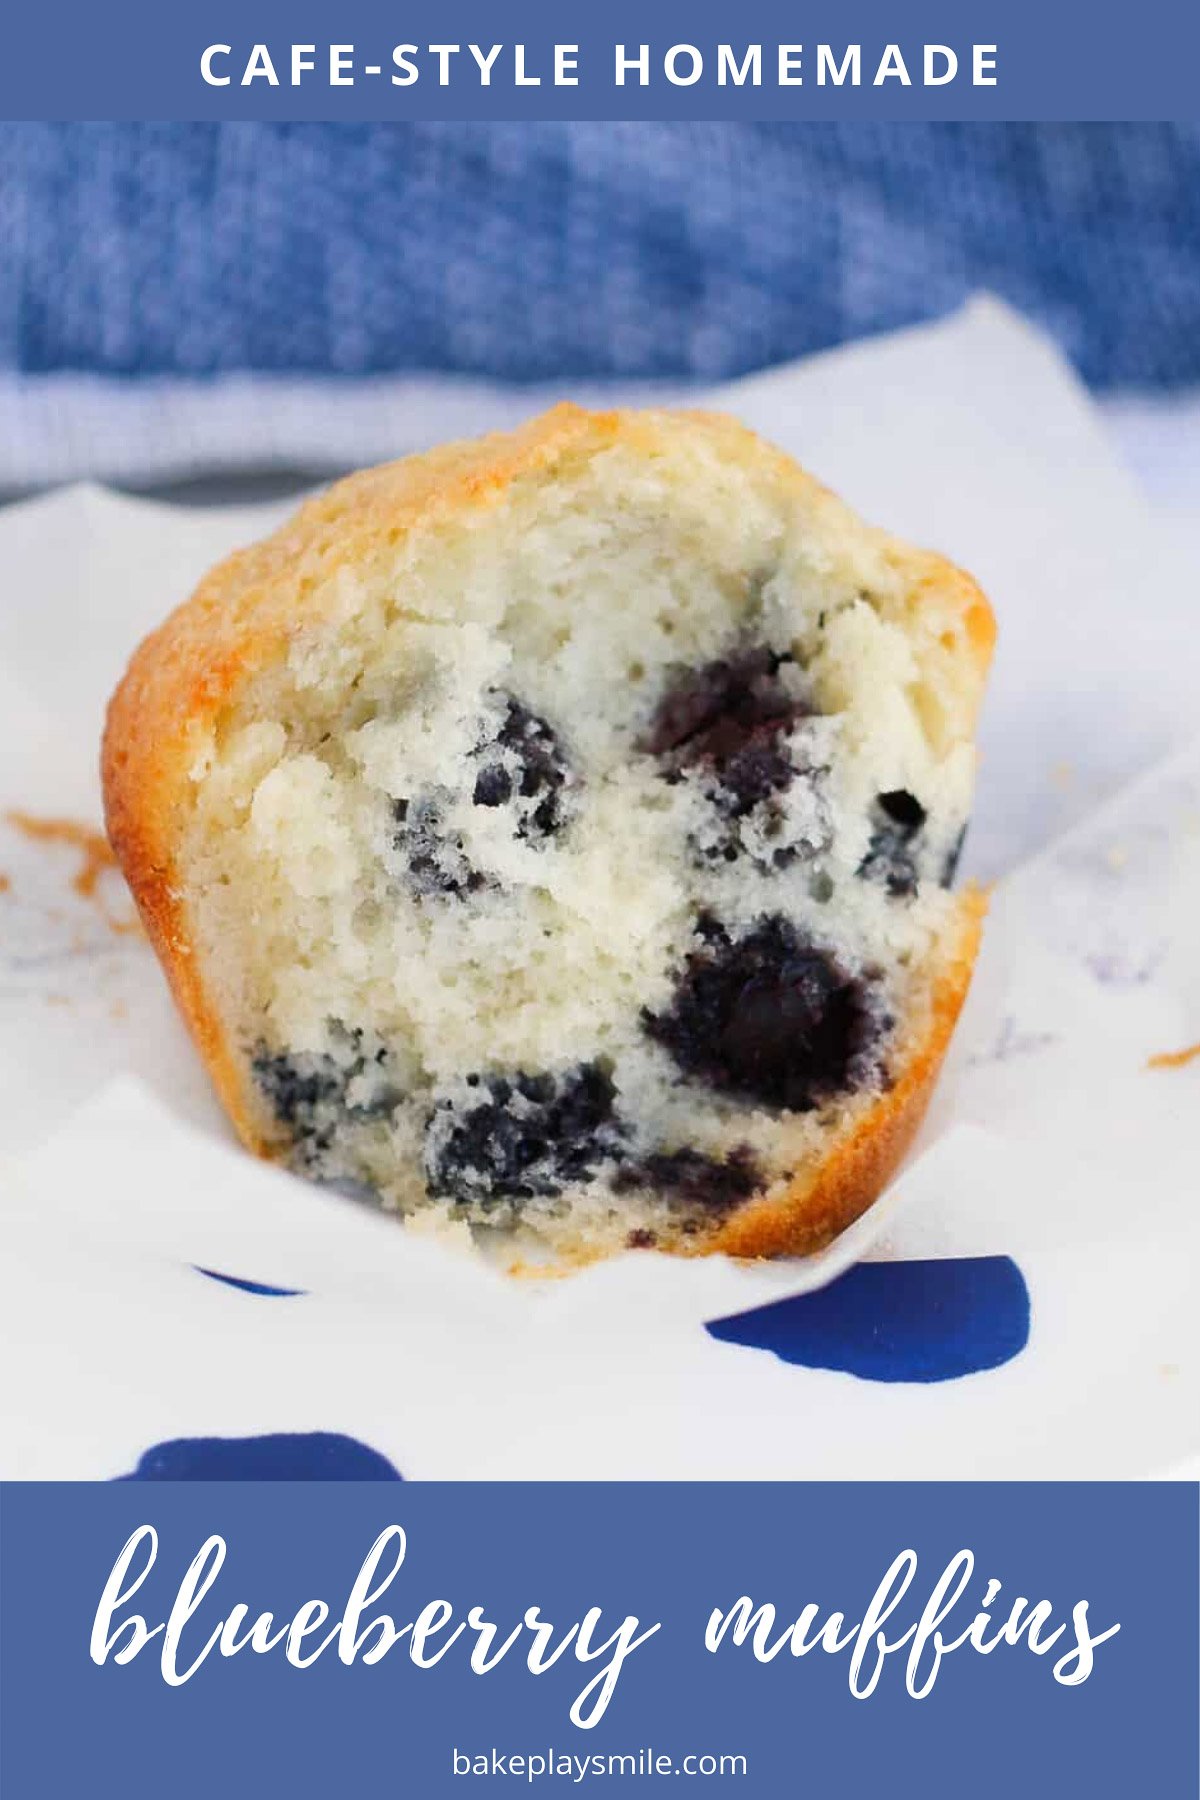 A half-eaten sweet white muffin with blueberries mixed throughout.